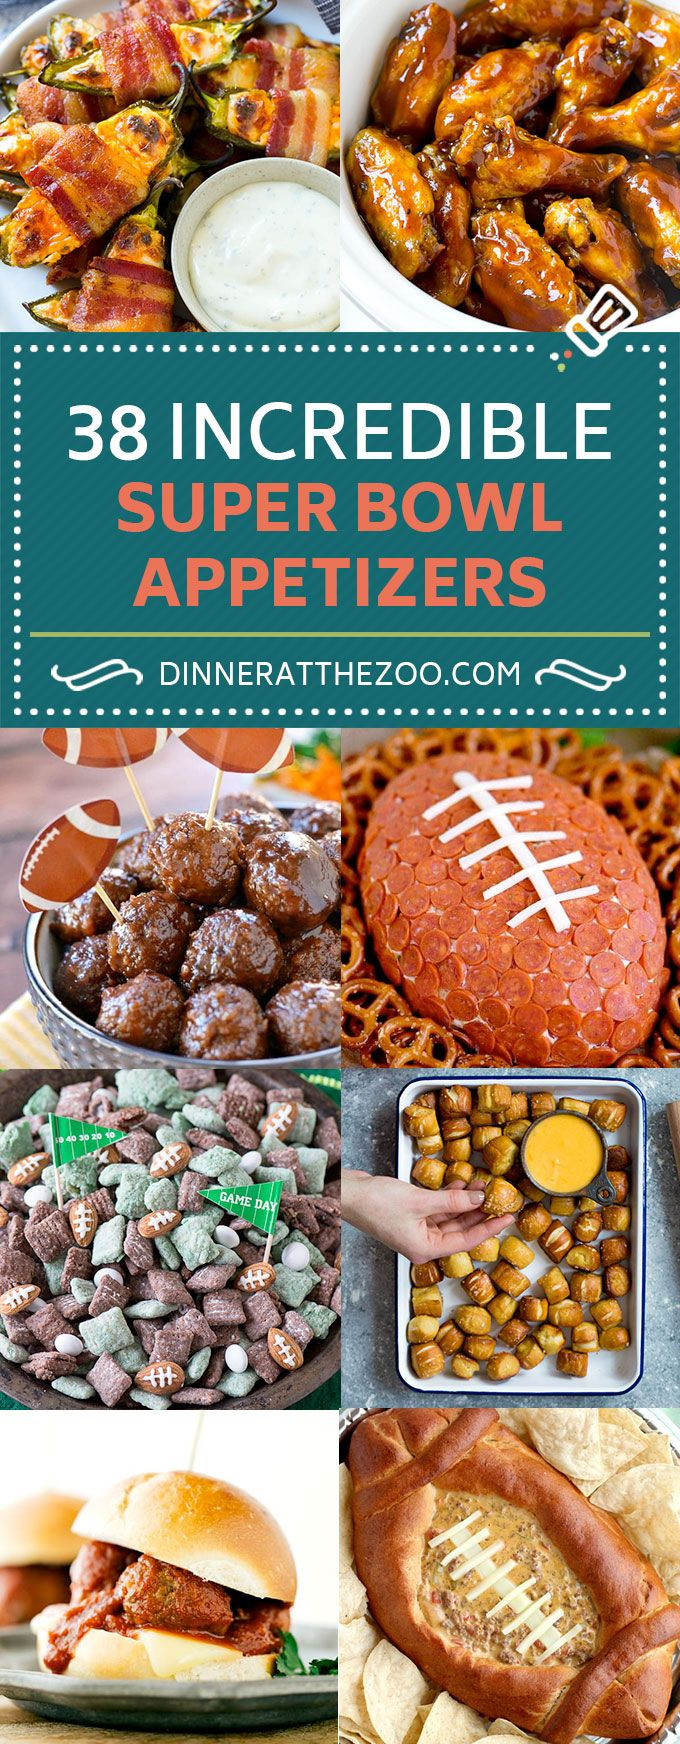 Super Bowl Healthy Appetizers
 38 Super Bowl Appetizer Recipes in 2019